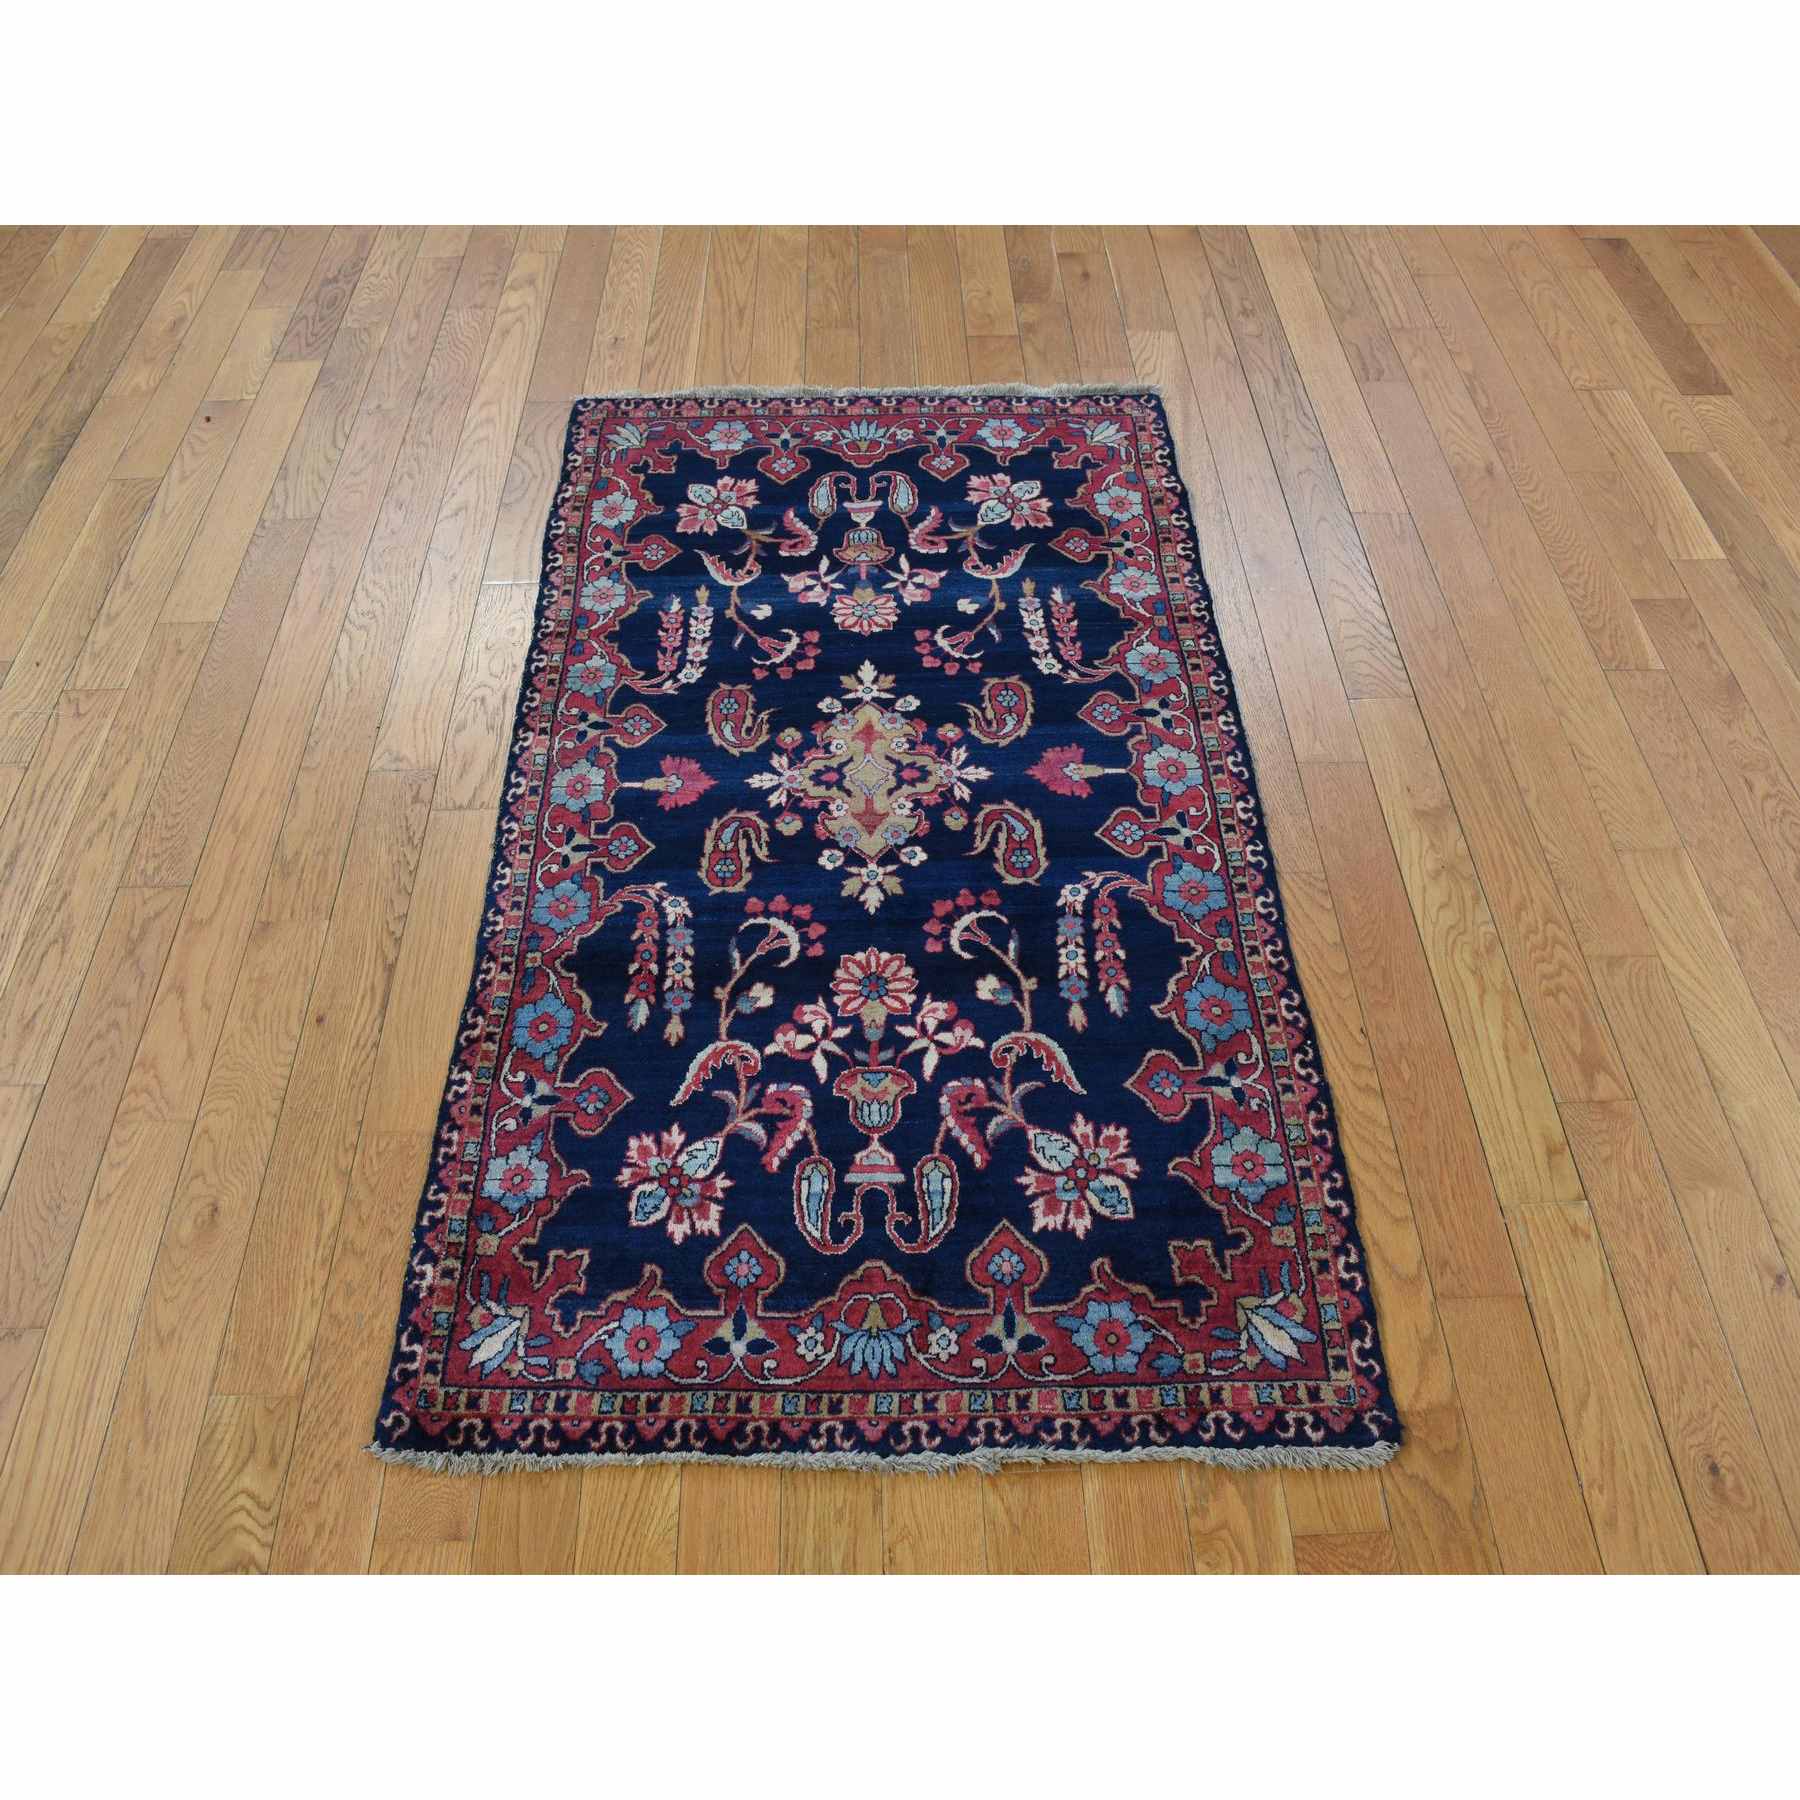 Antique-Hand-Knotted-Rug-390820